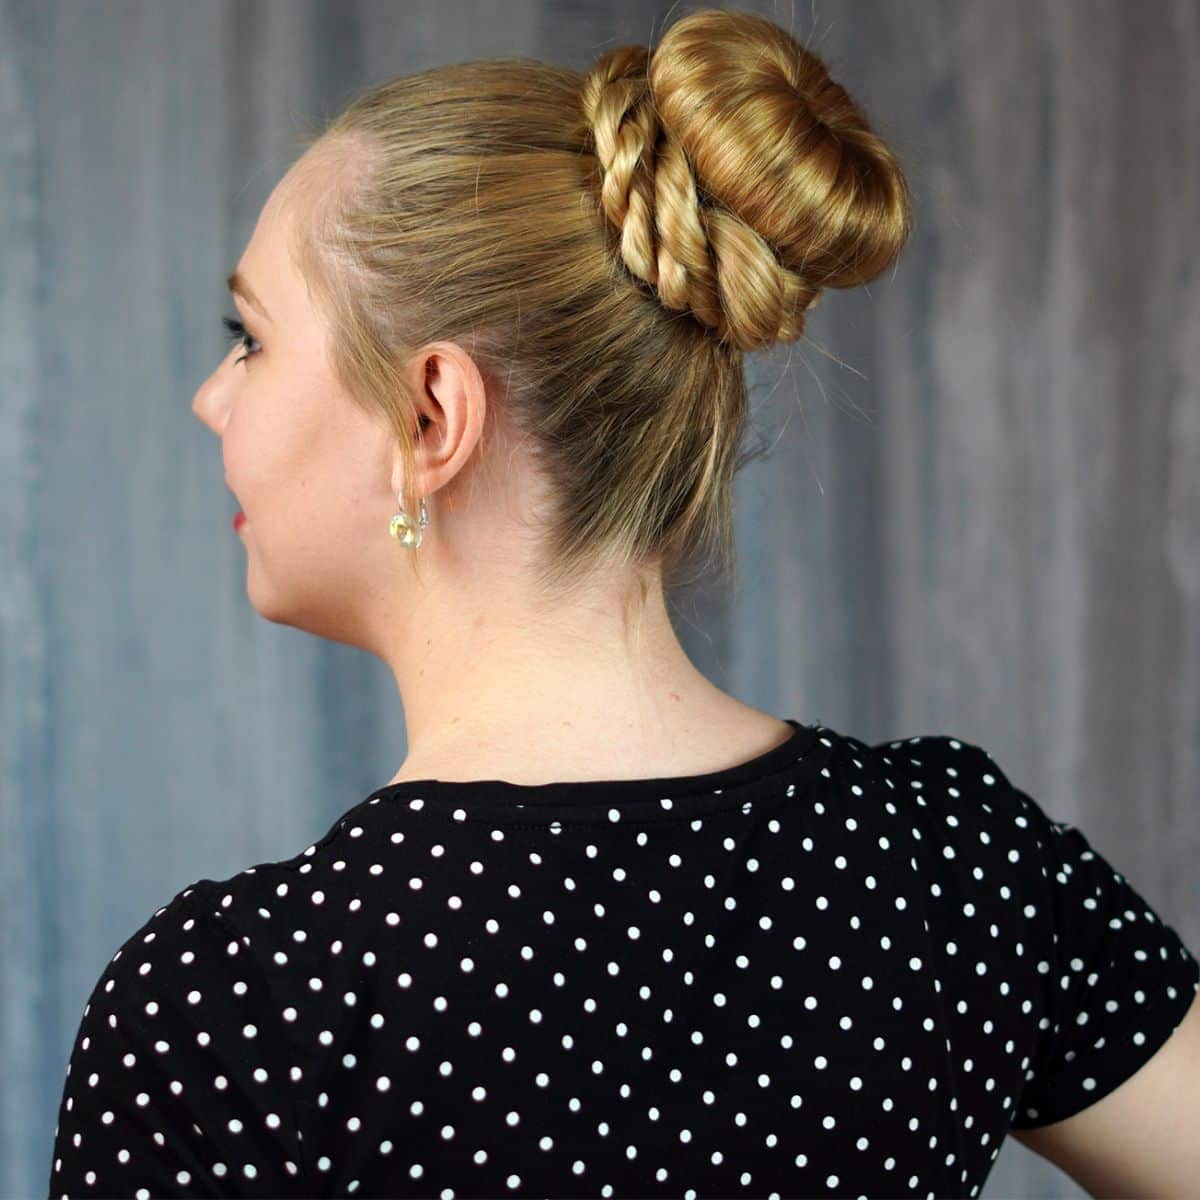 How to Create a Chignon Bun, Plus History and Tips